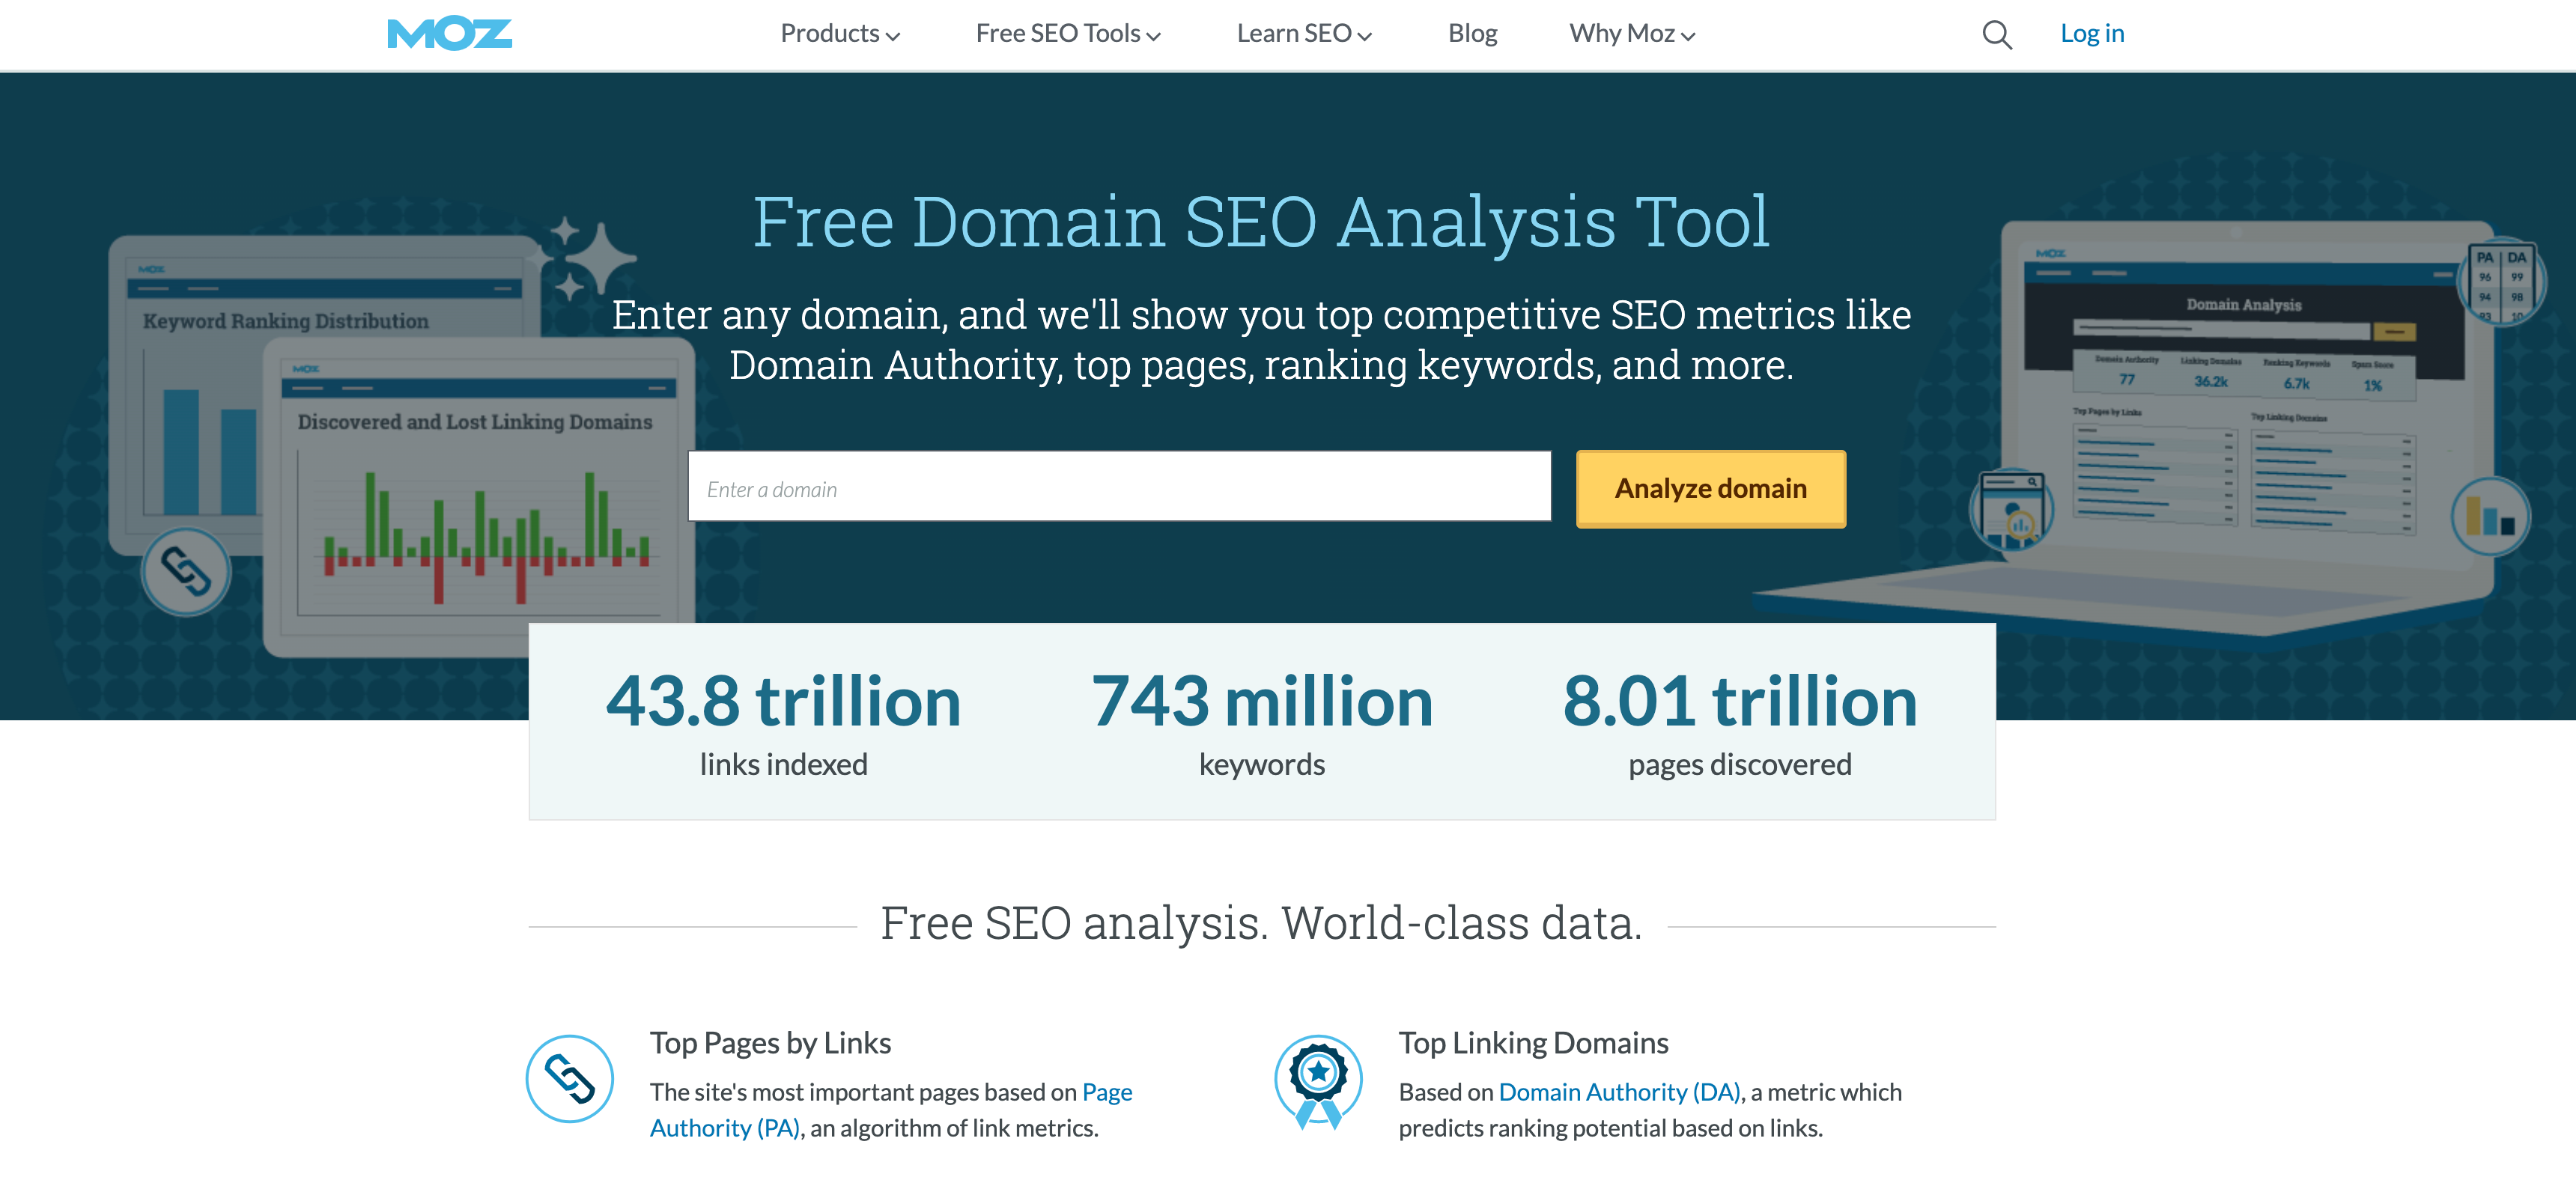 domain competitive analysis tool: Moz